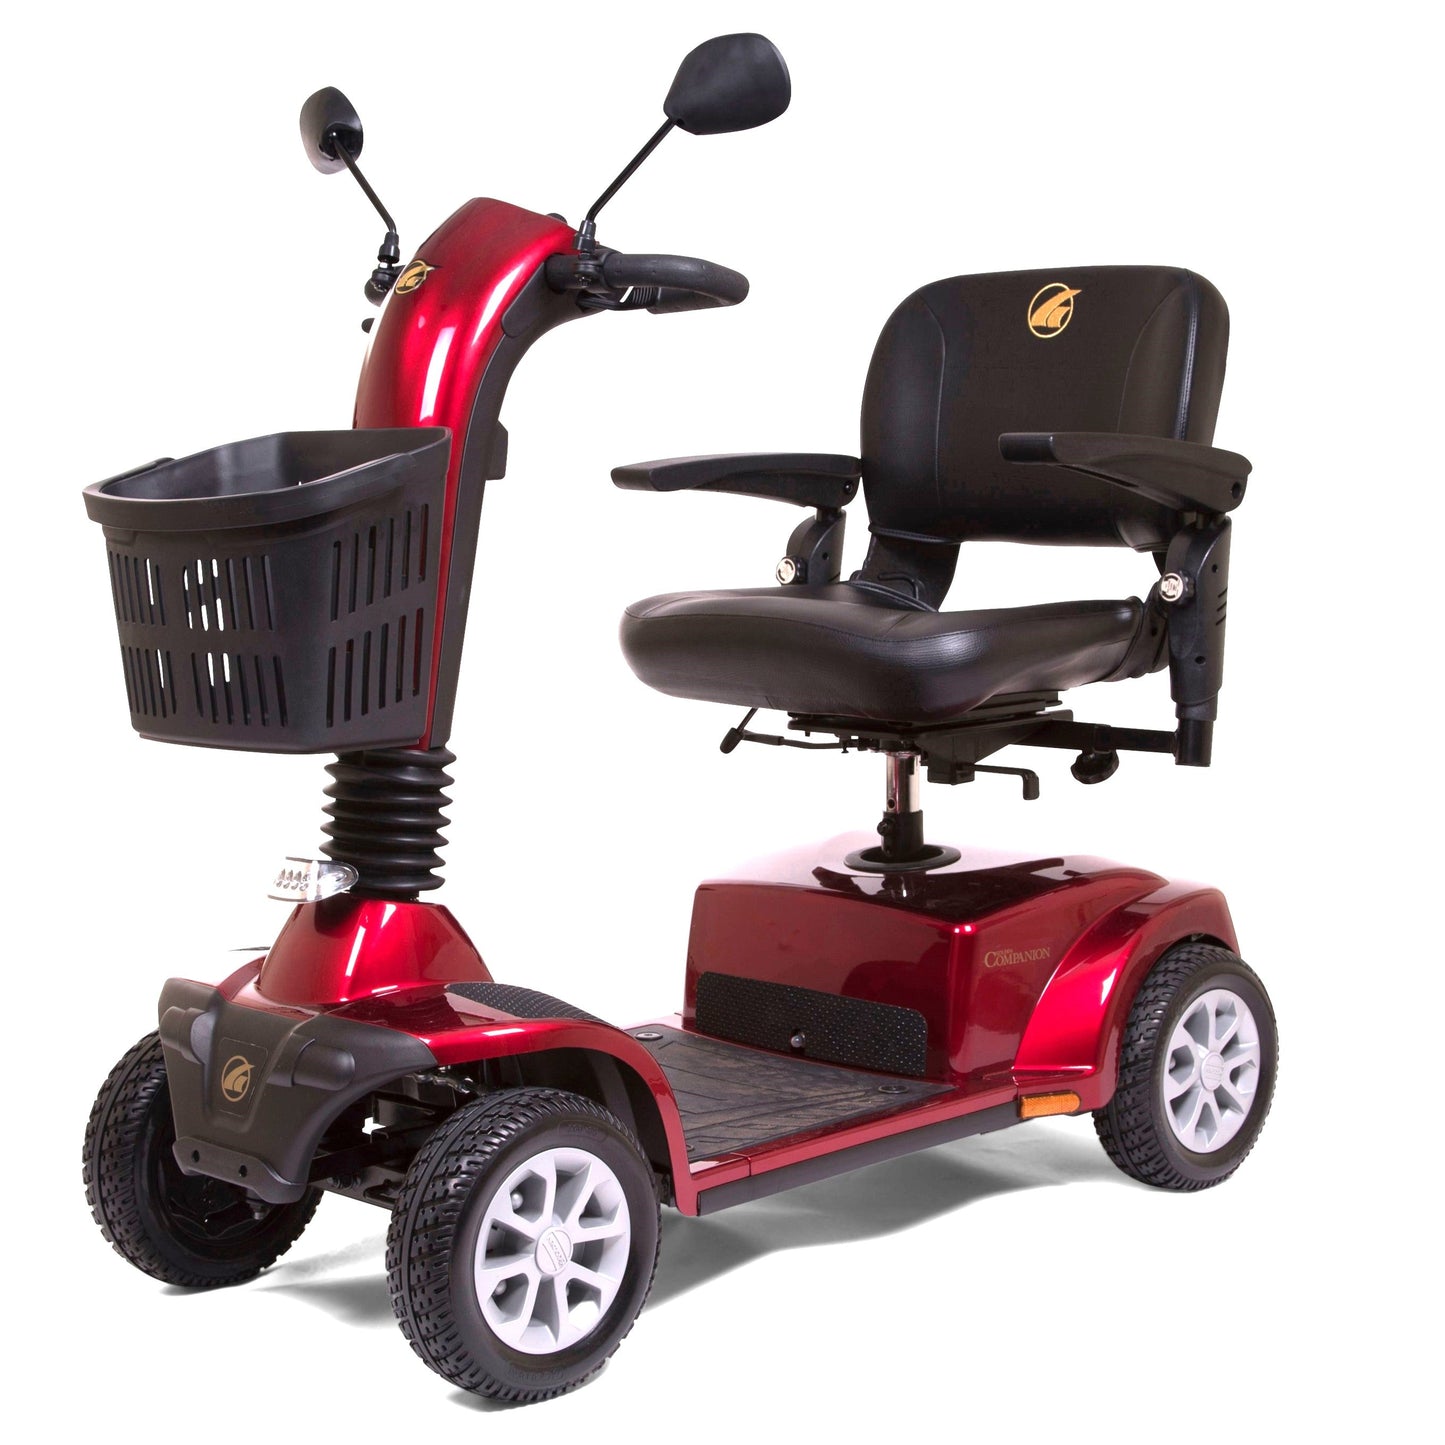 Companion 4-Wheel Full Size Mobility Scooter - GC440C